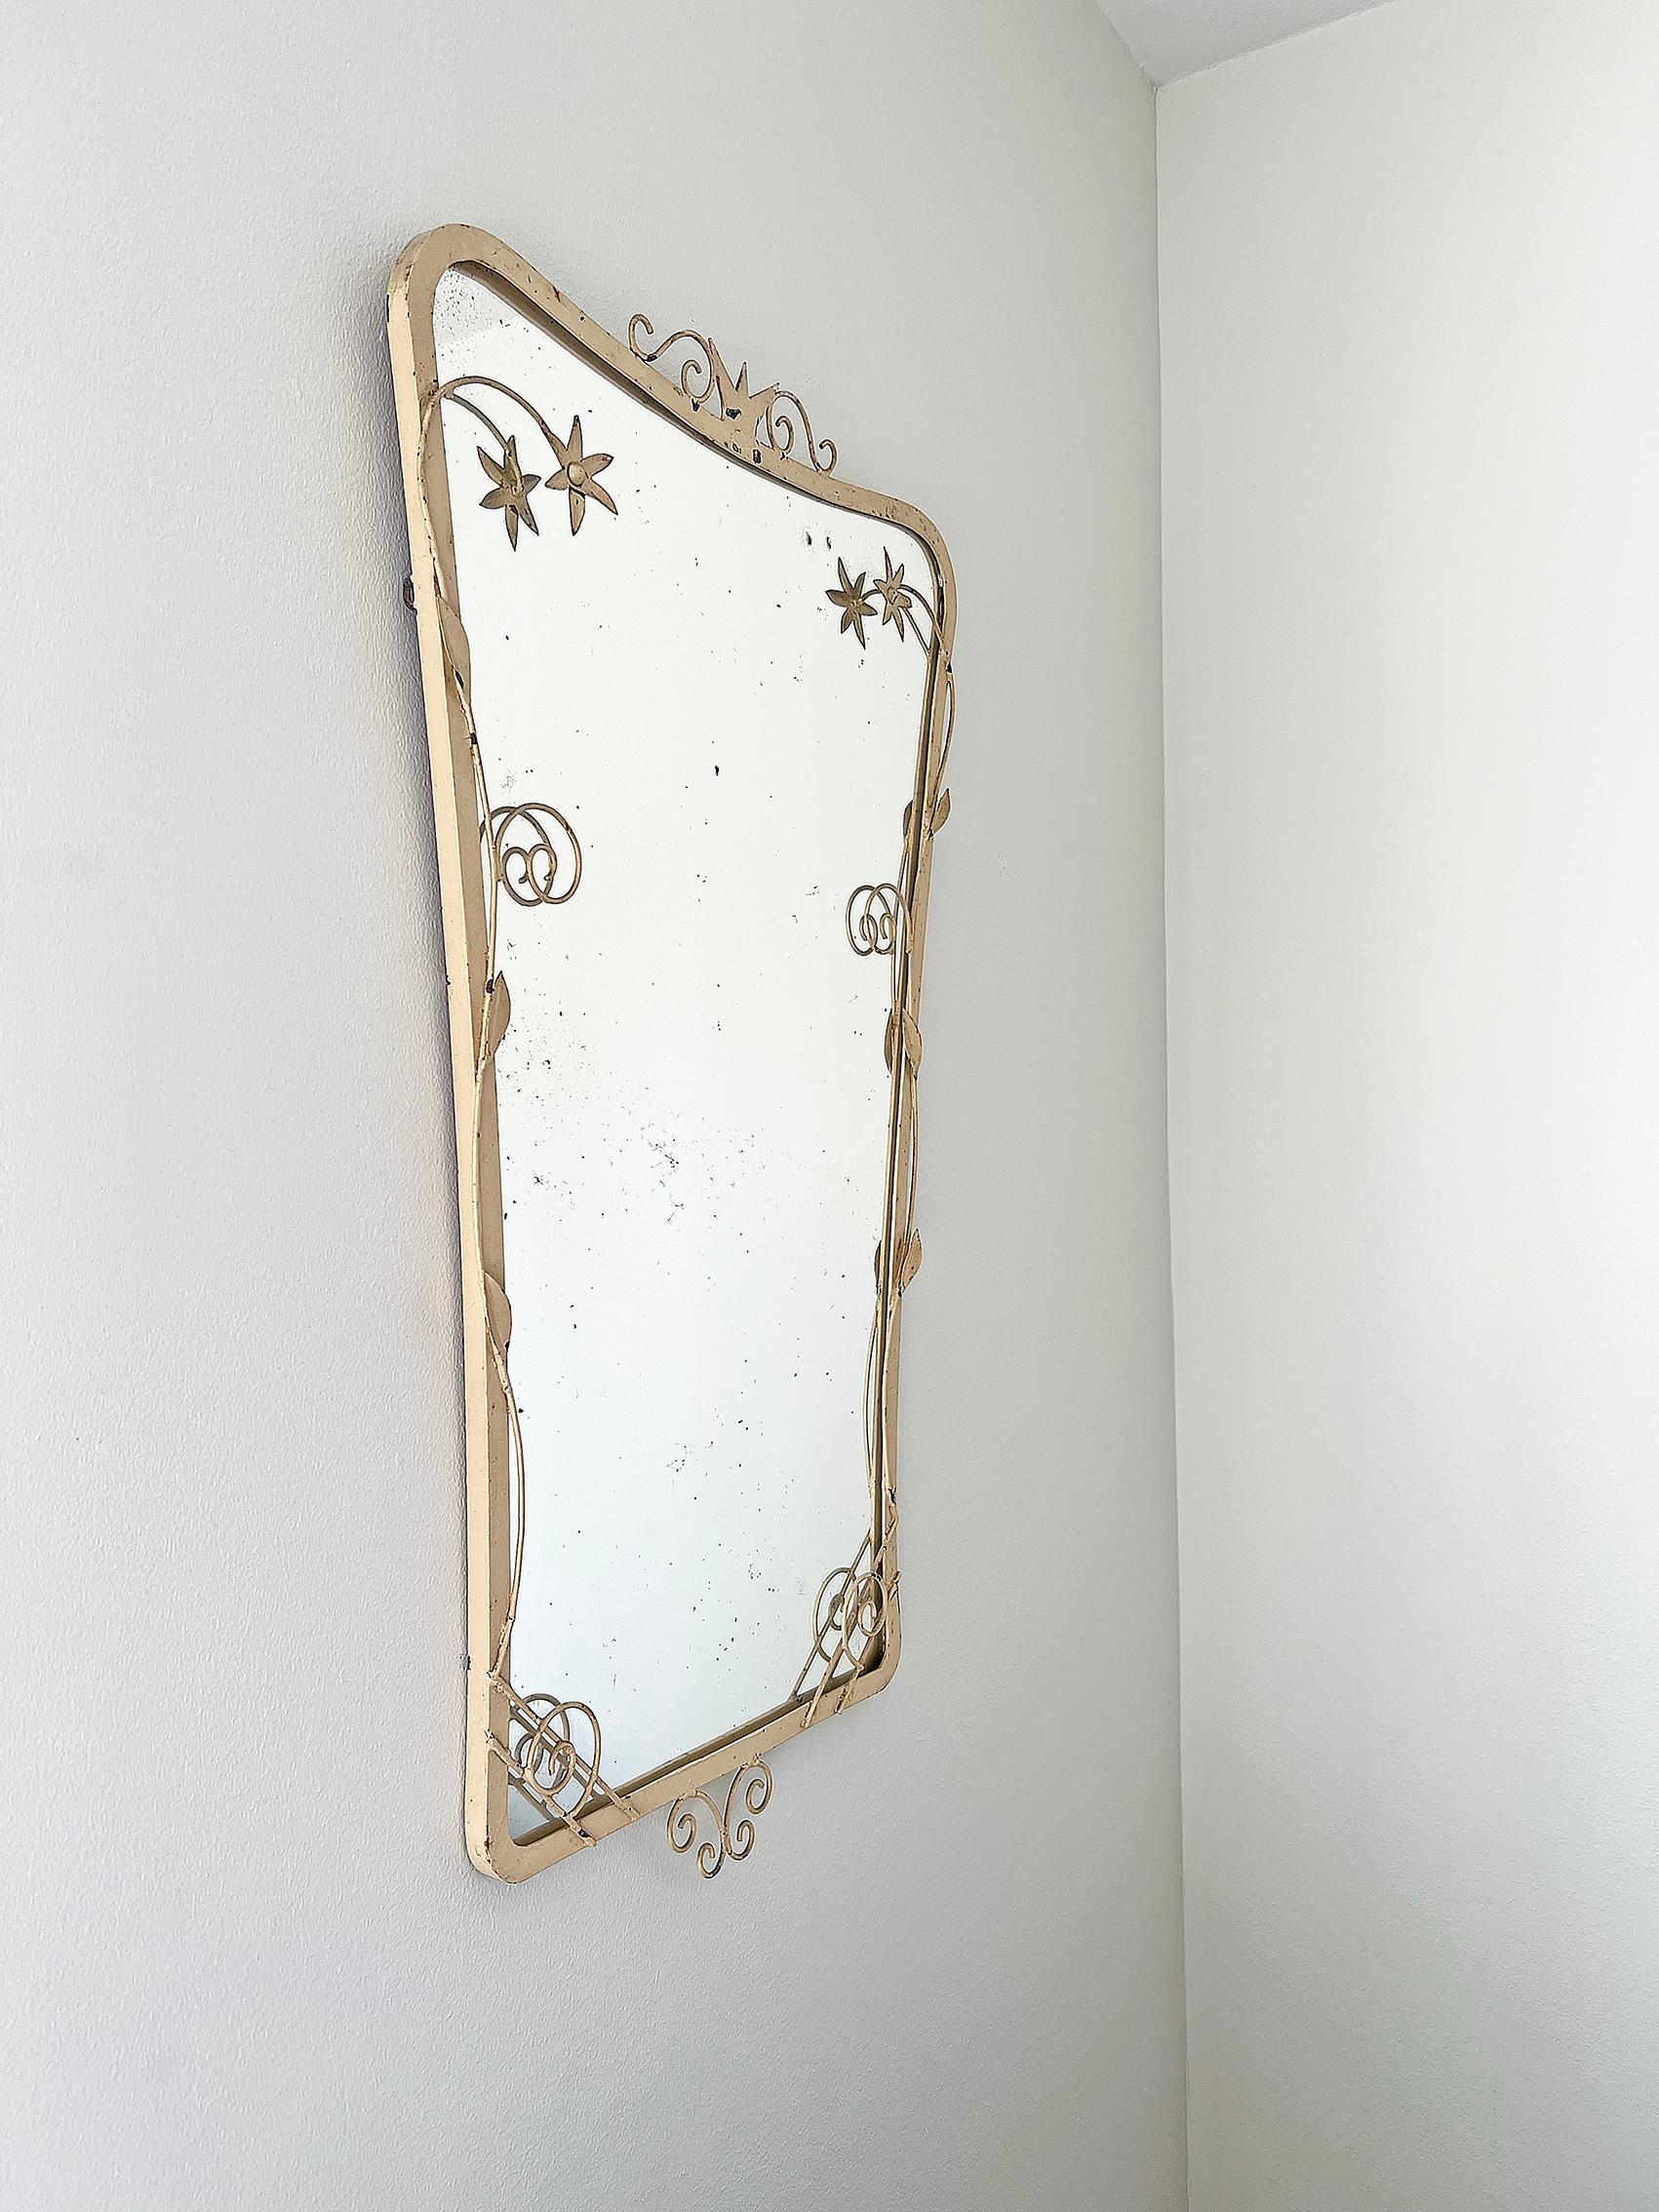 Very rare and beautiful scandinavian modern wall mirror, Sweden, circa 1940s.
Decorative piece with flowers, leaves and a crown on the top. 
Unknown designer and maker. 
Condition: wear consistent with age and use. Rust, color loss, marks and